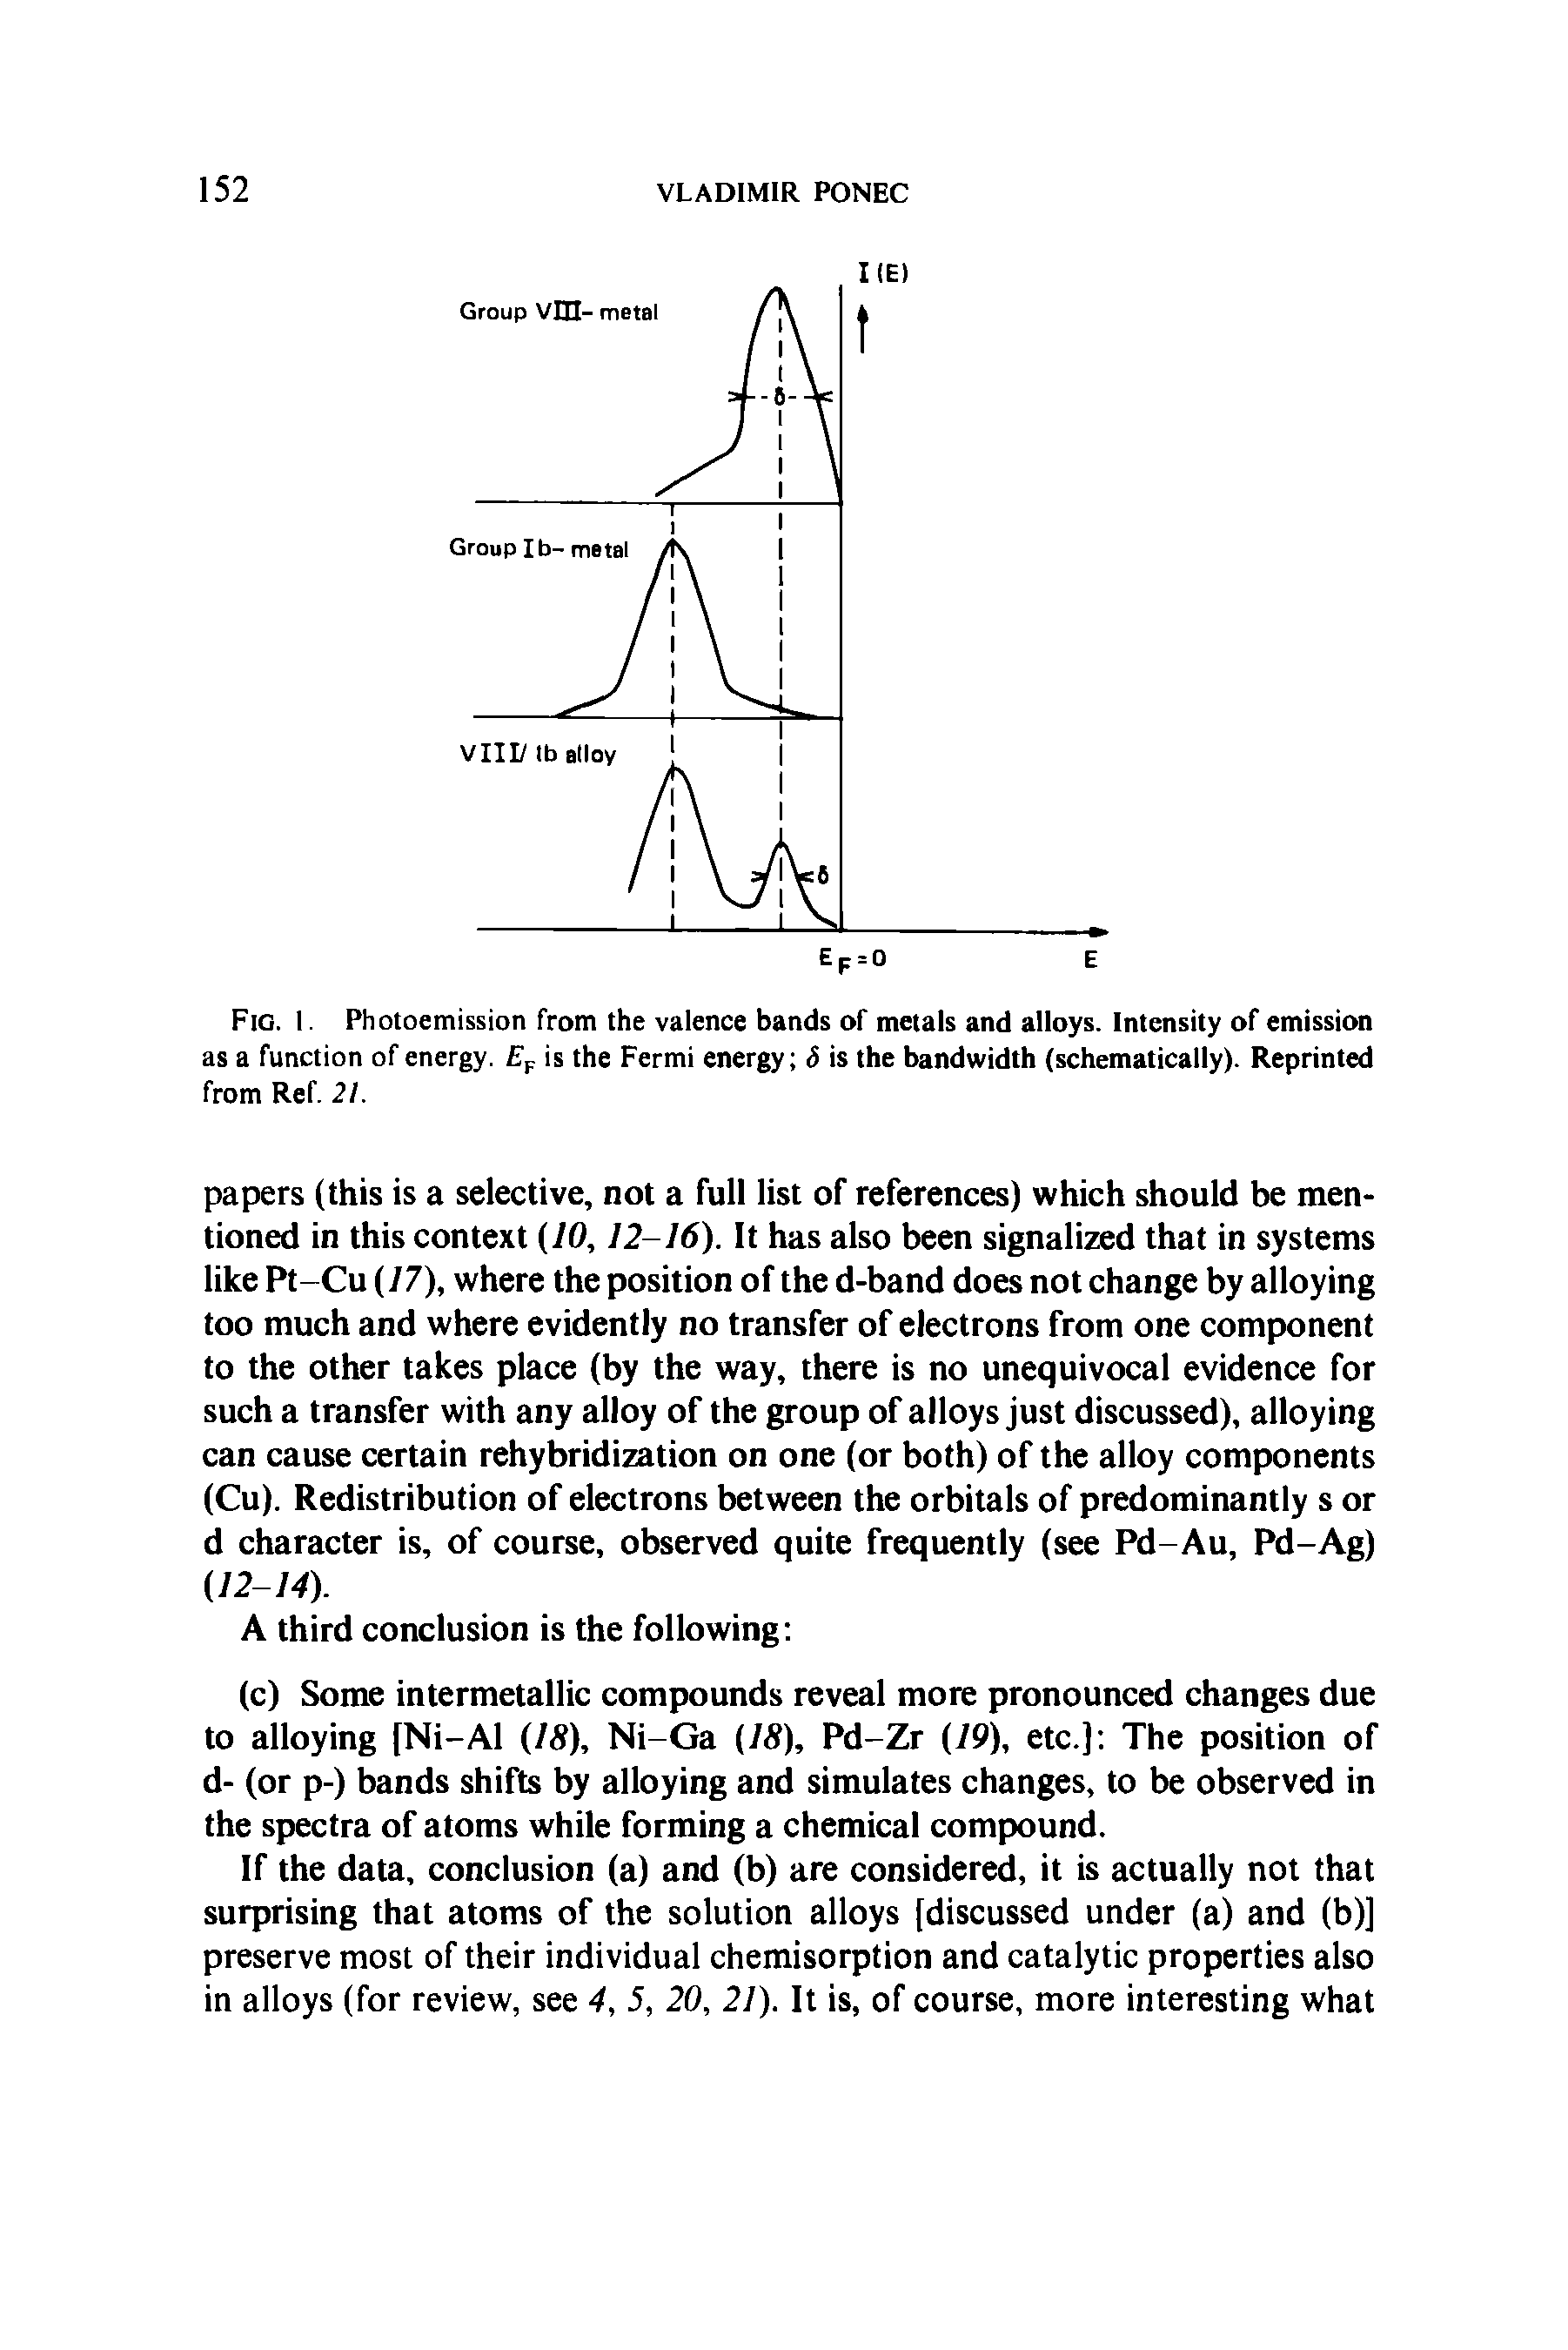 Fig. 1. Photoemission from the valence bands or metals and alloys. Intensity of emission as a function of energy. F is the Fermi energy S is the bandwidth (schematically). Reprinted from Ref. 21.